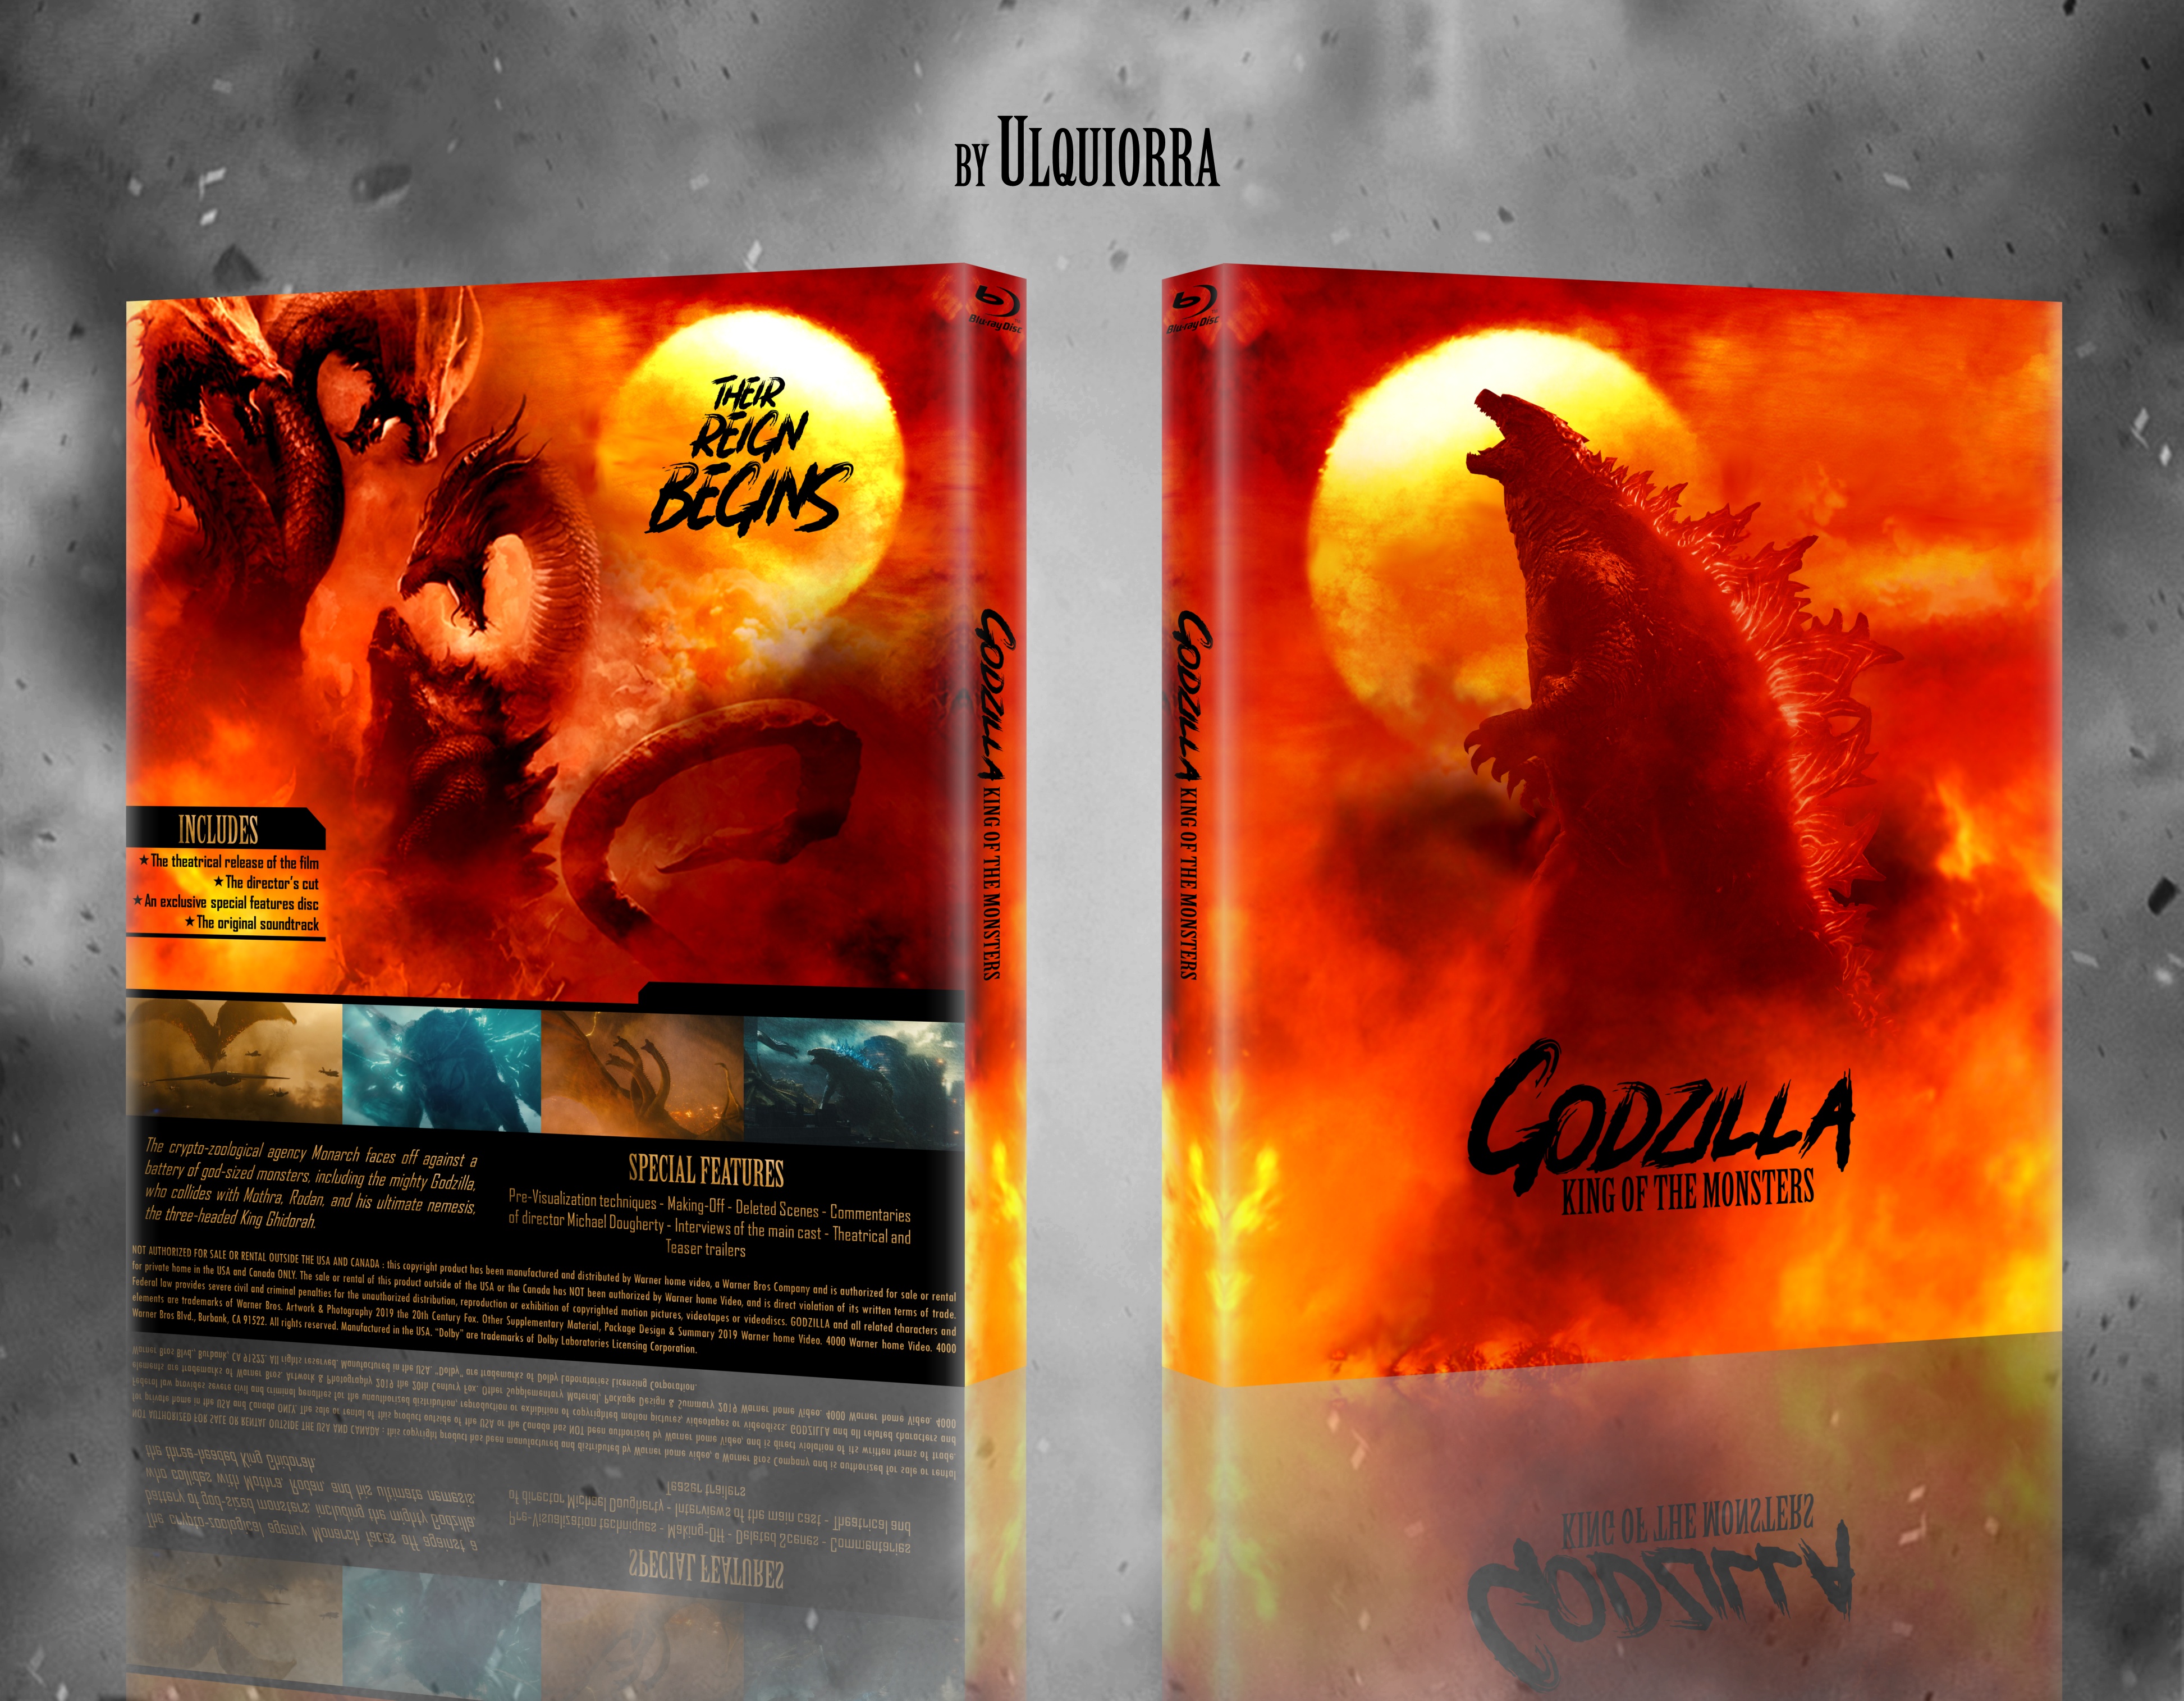 Godzilla: King of the Monsters box cover